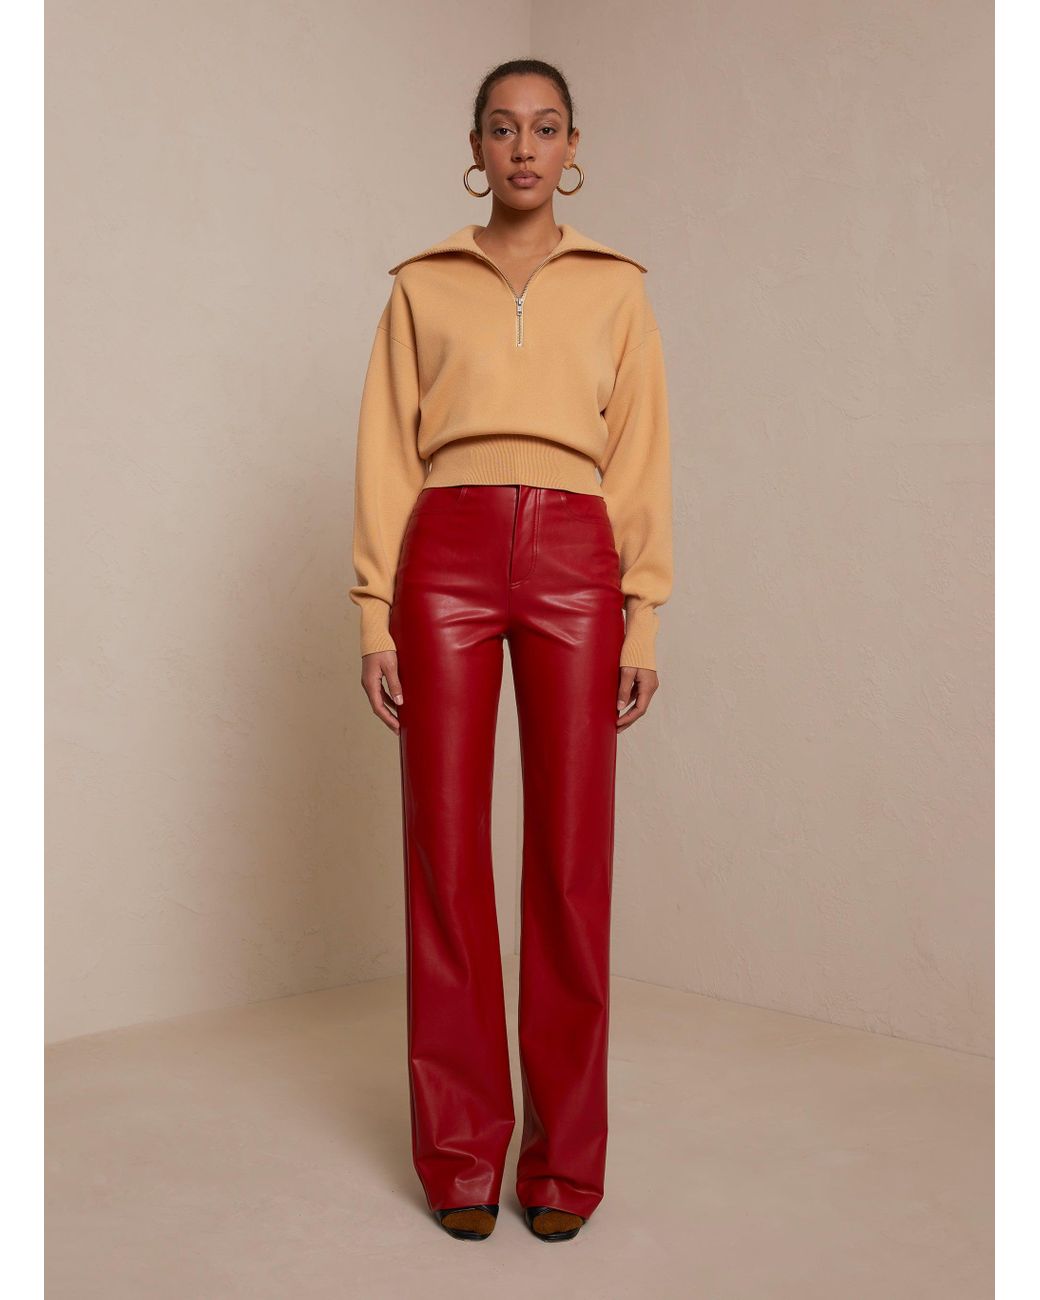 Leather Pants Outfit Idea Red Leather Separates  Black Clutch  15 Ways  to Wear Leather Pants Like a Total Fashion Pro This Season  POPSUGAR  Fashion Middle East Photo 13